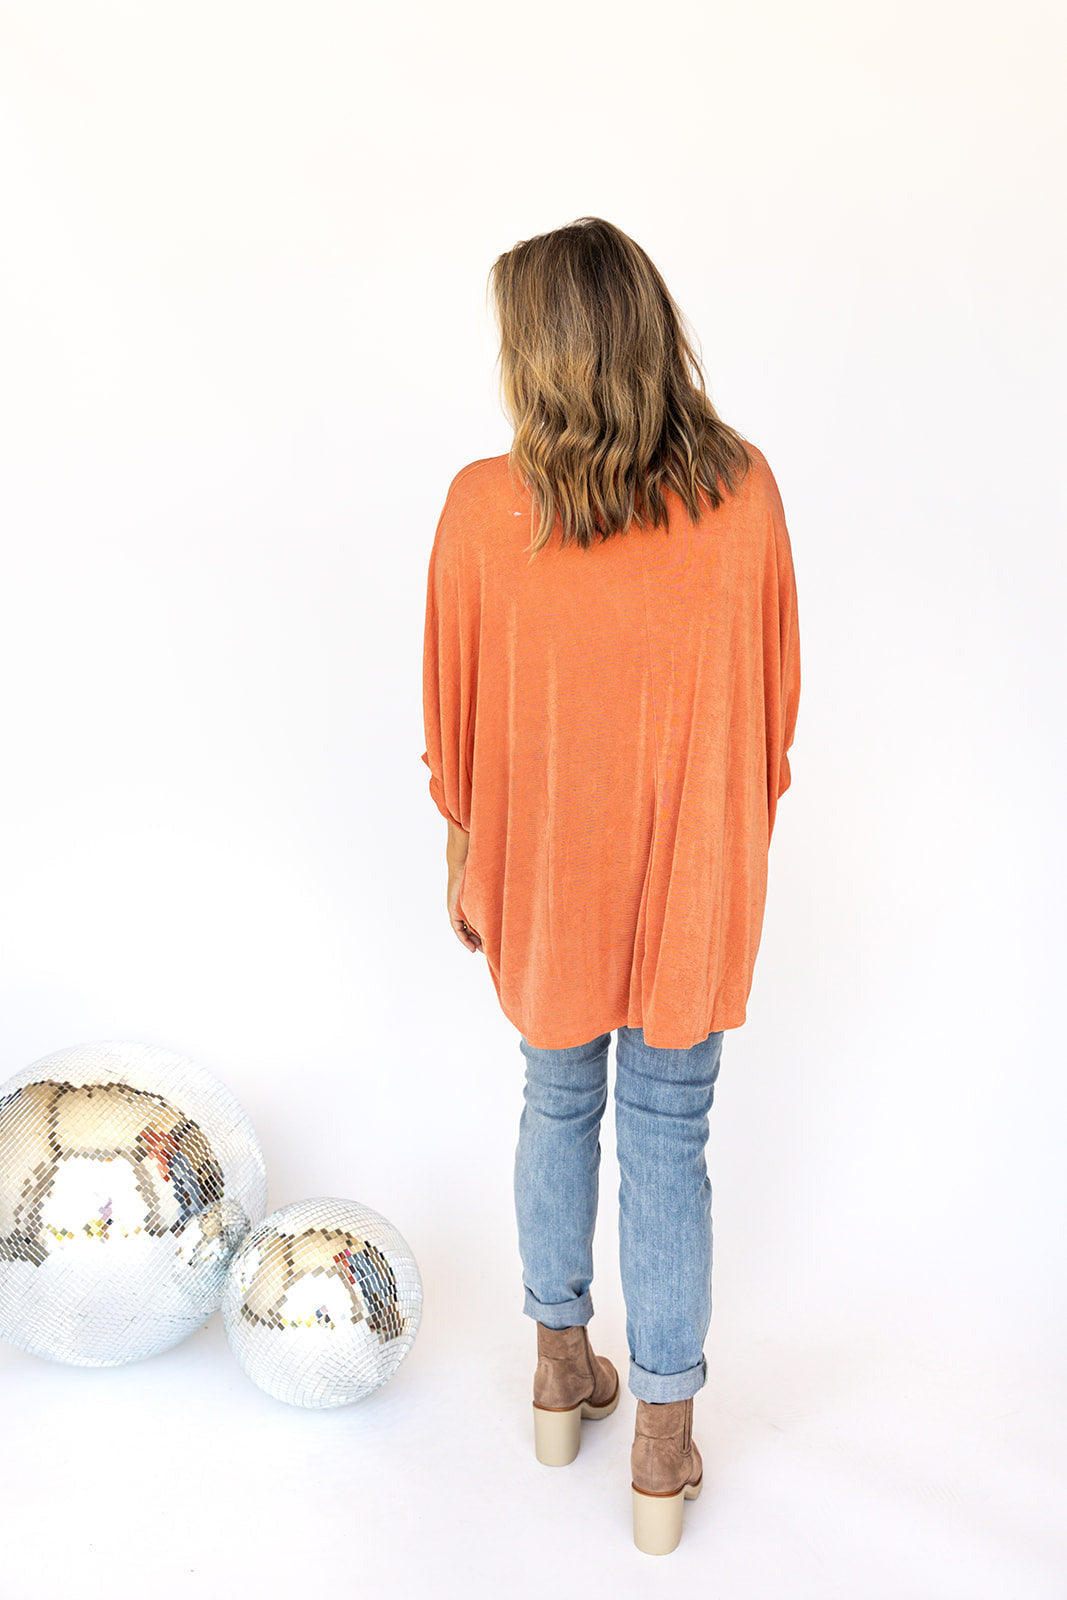 Sweet Tooth Blouse - Ginger